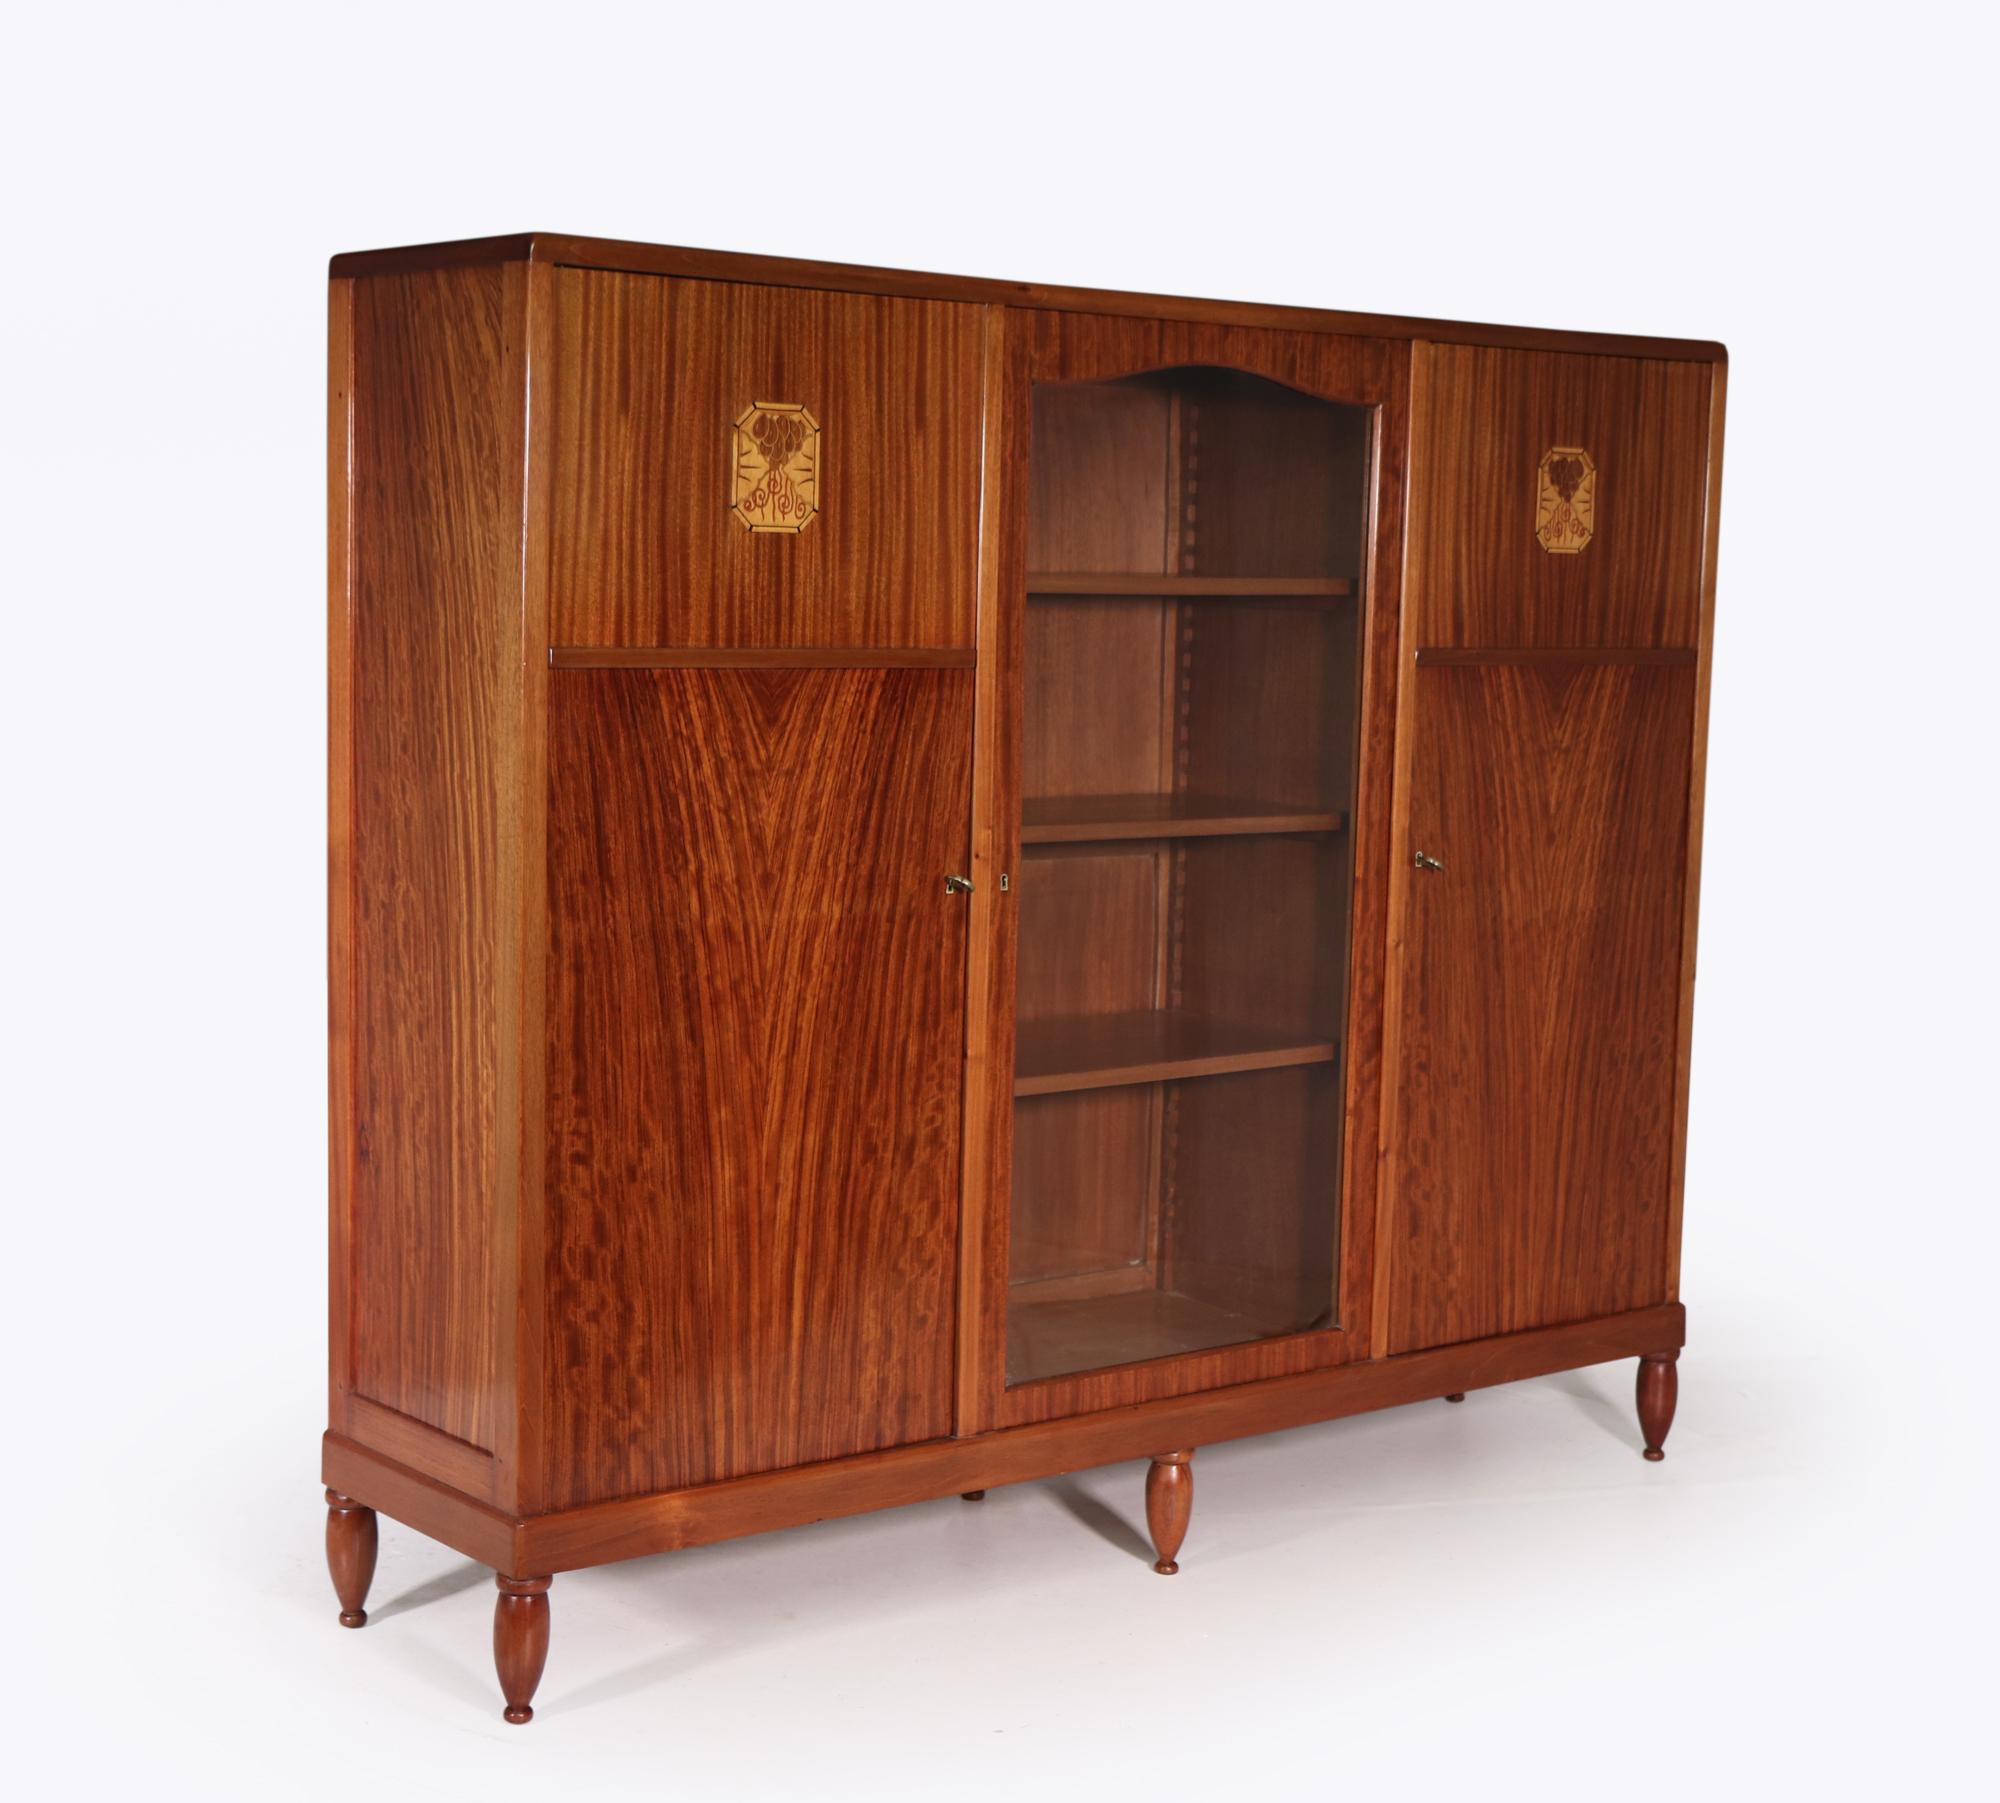 A French Art Deco Library bookcase in Mahogany and other exotic veneers, the emblem on the two blind doors is excellent work the cabinet has nine adjustable shelves so plenty of room to fit your favorite books, the glazed central section still has